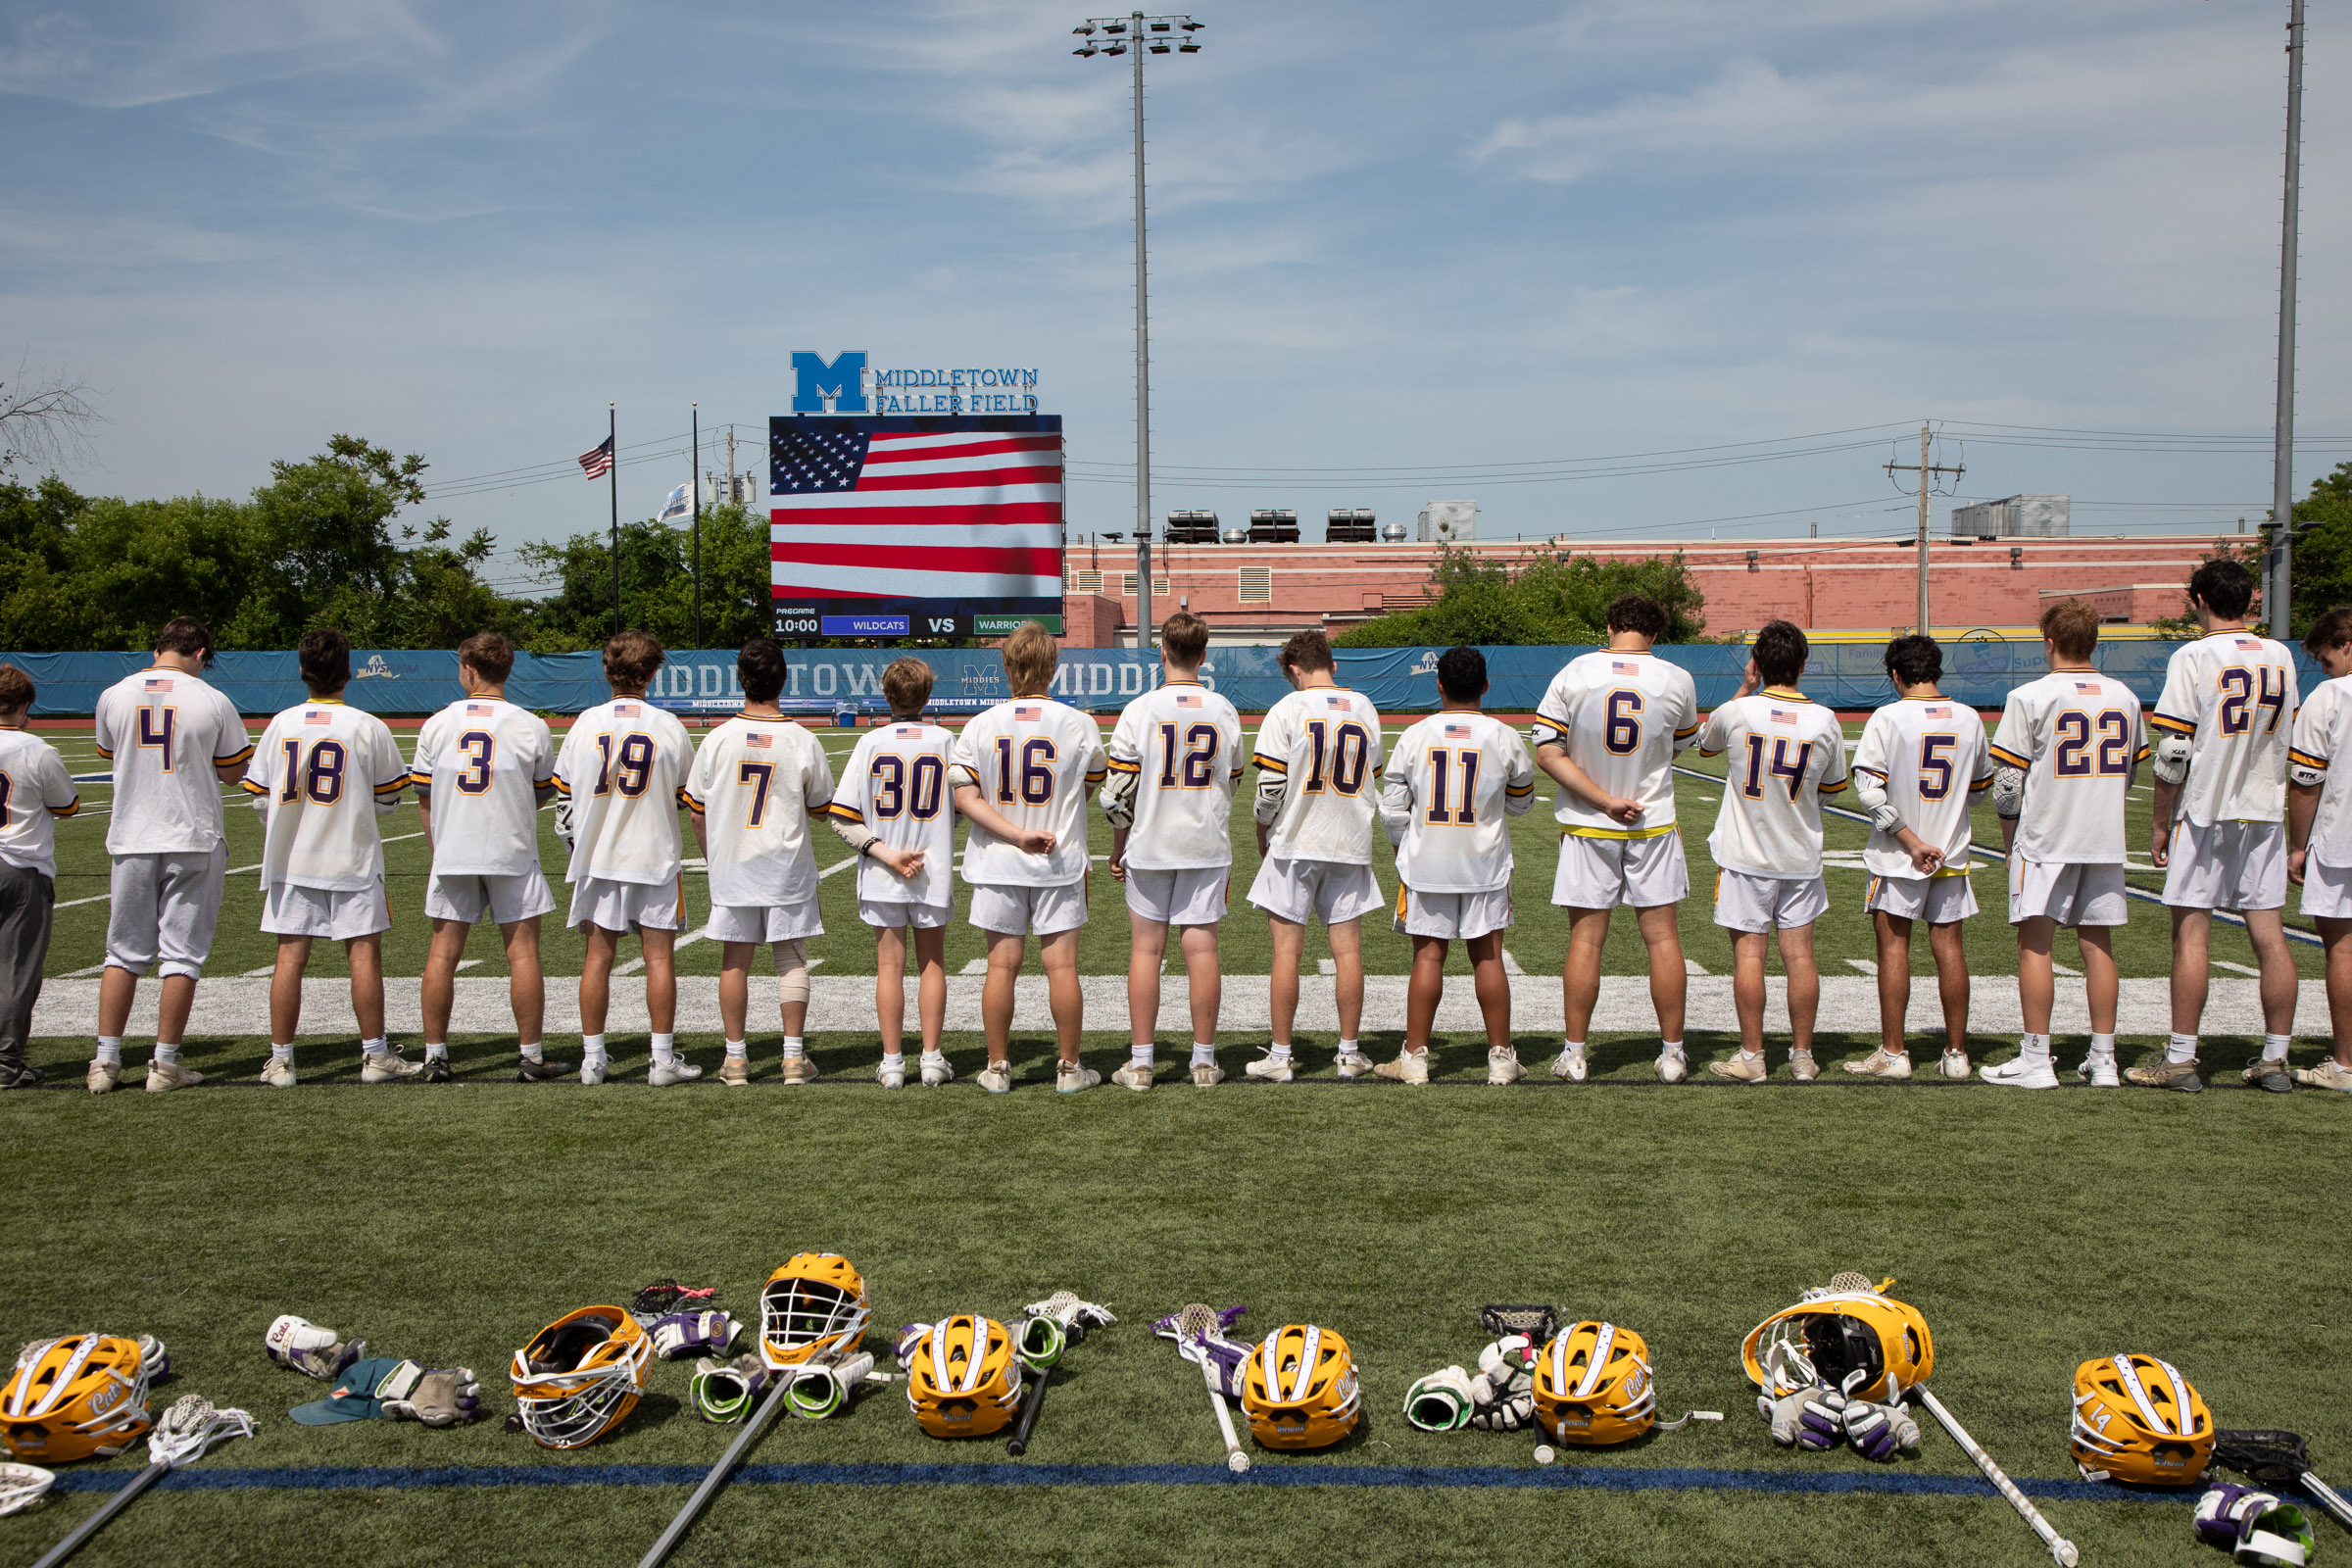 The Warwick Valley varsity boys lacrosse team stands on the field before the Section 9 Class B championship game at Middletown's Faller Field.